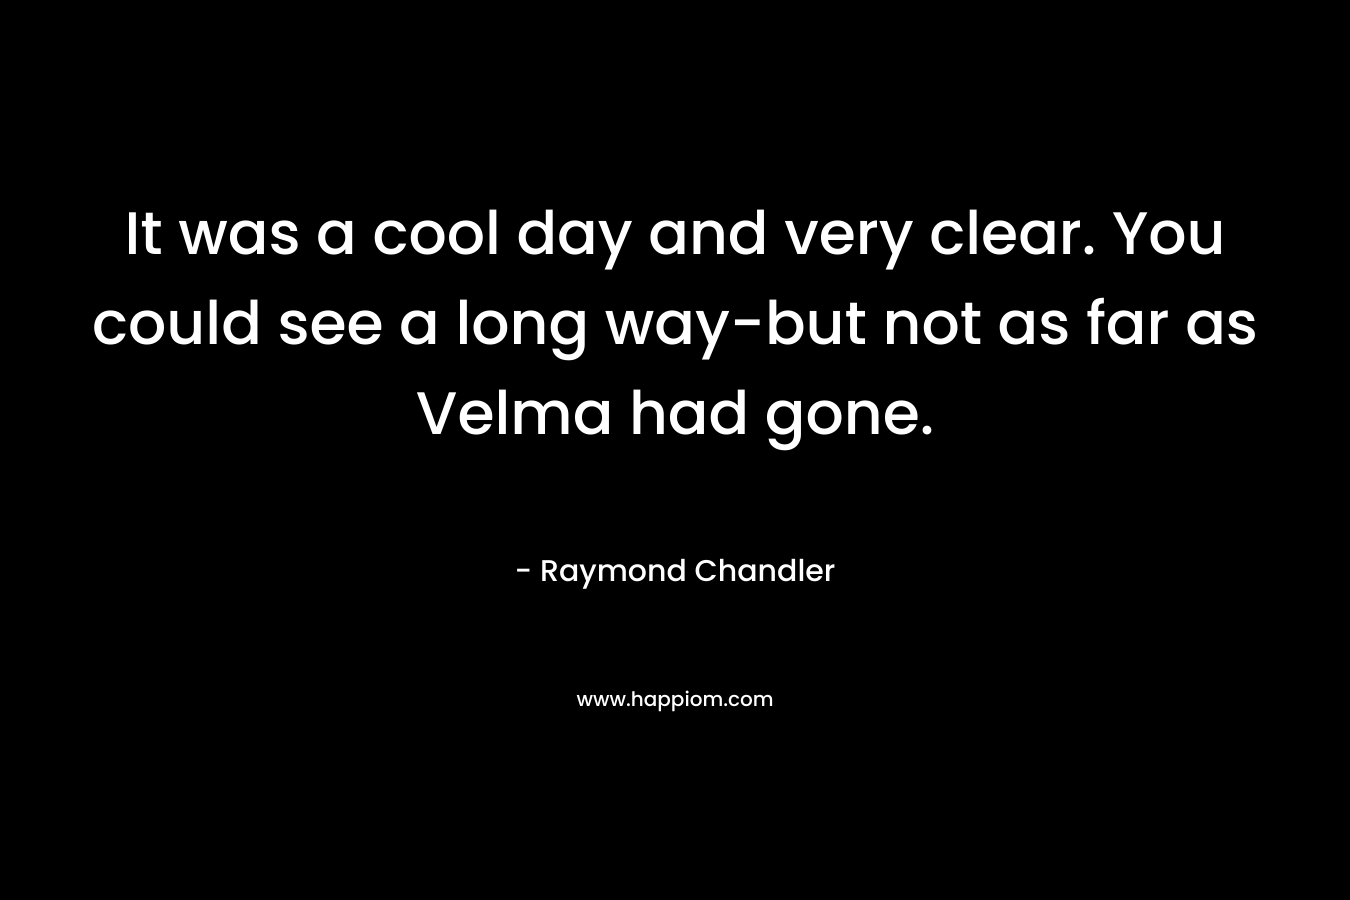 It was a cool day and very clear. You could see a long way-but not as far as Velma had gone.